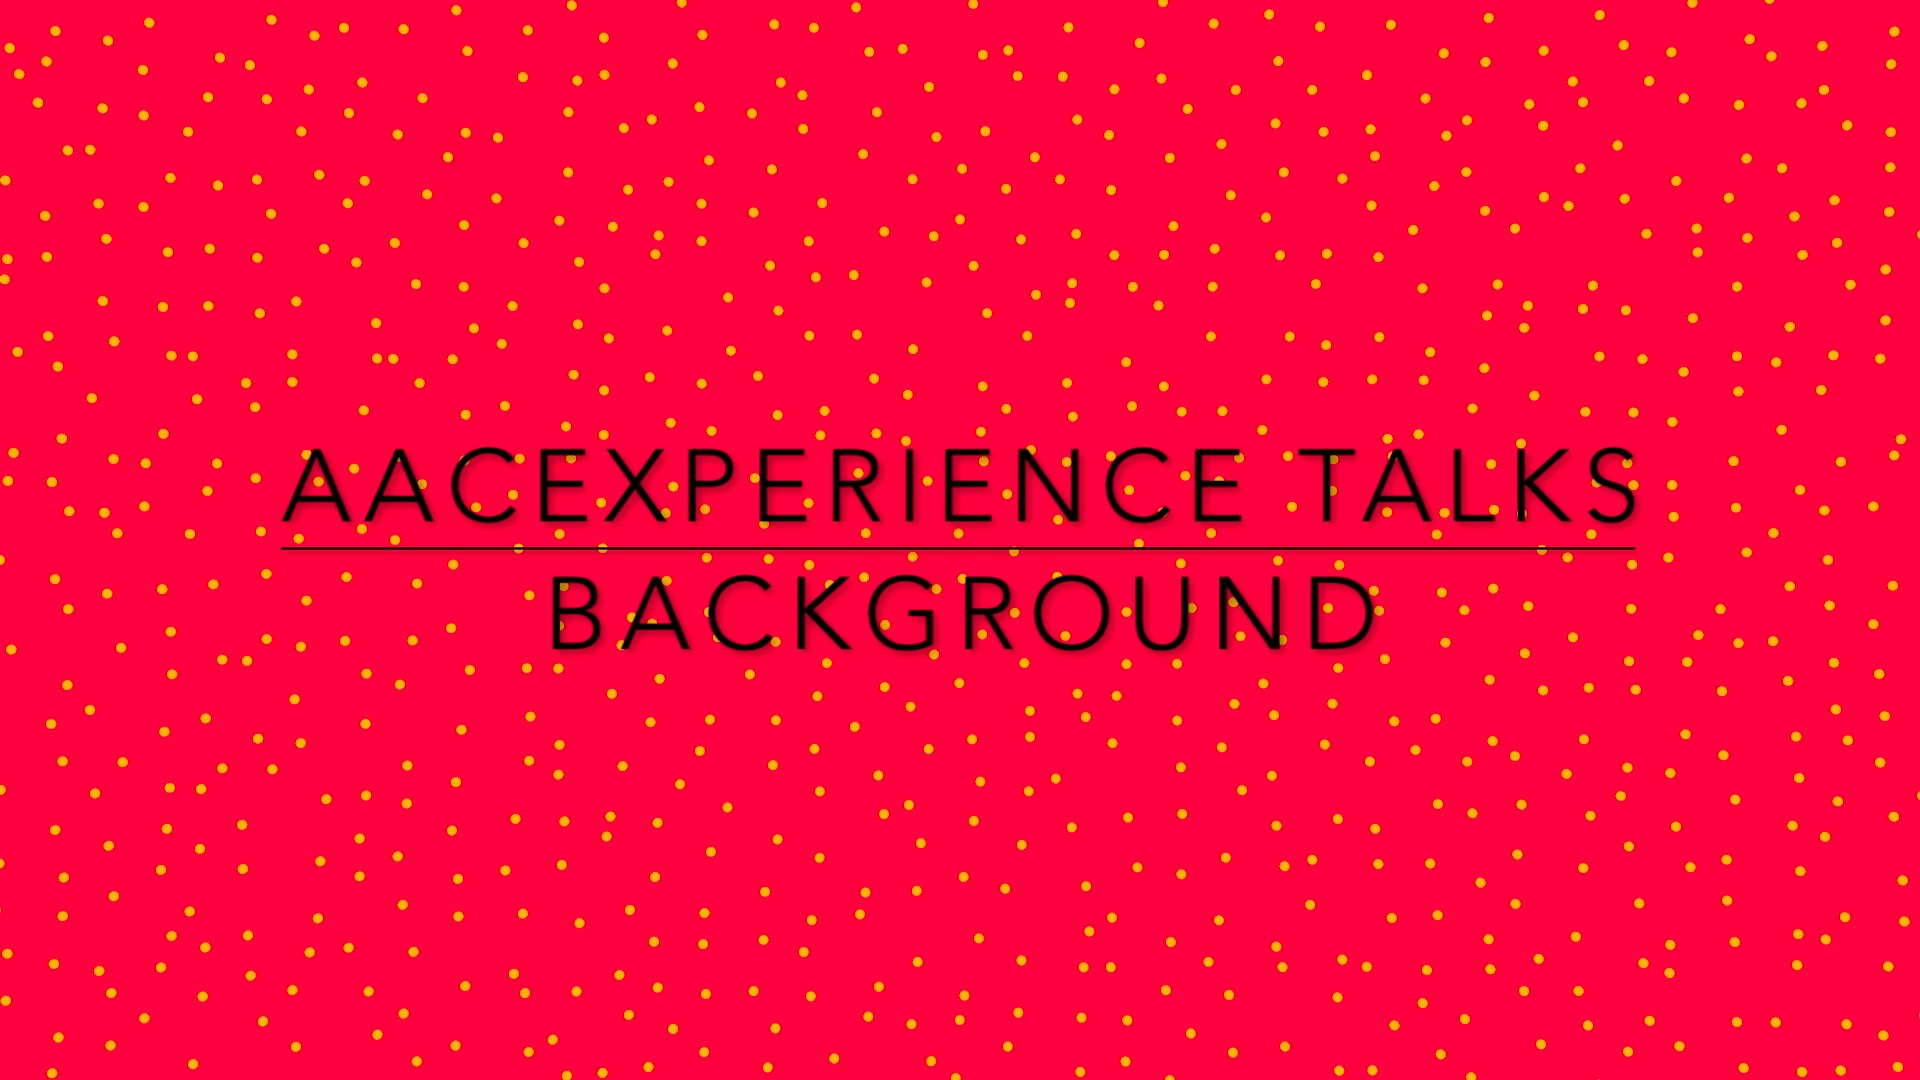 AACExperience Talks: Our Journey - Background, Equipment, Apraxia, DAYBUE & New Therapies